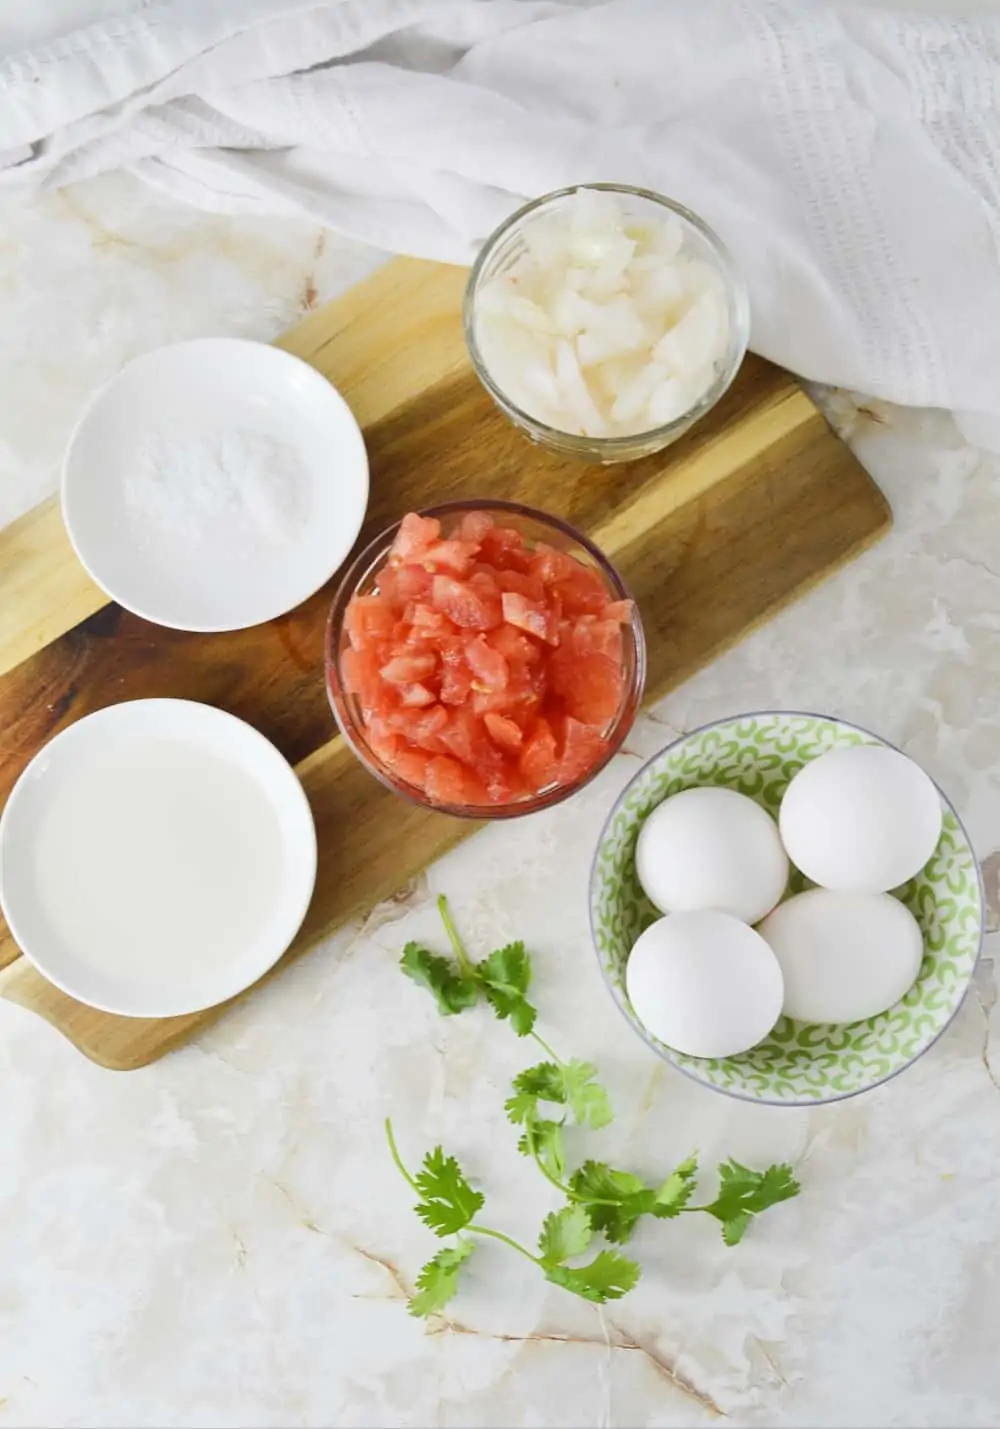 Ingredients for scrambled egg with tomato includes white onion, tomato, salt and cilantro ( optional).